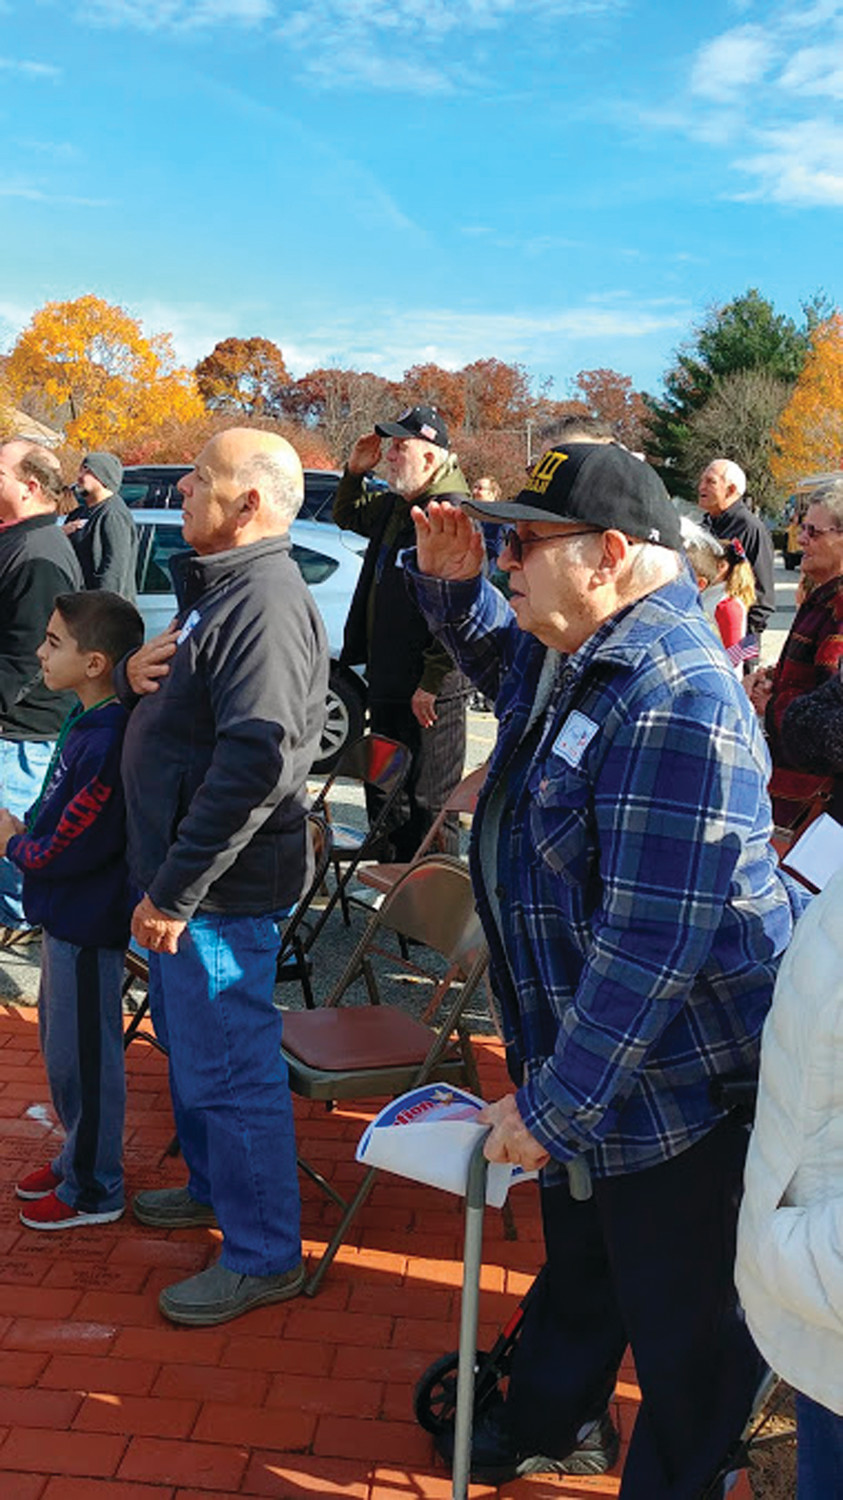 A SPECIAL SALUTE: Veterans including Frank Kay and Martin Normann could be seen saluting the flag and listening to the WHMS band play the Star Spangled Banner.